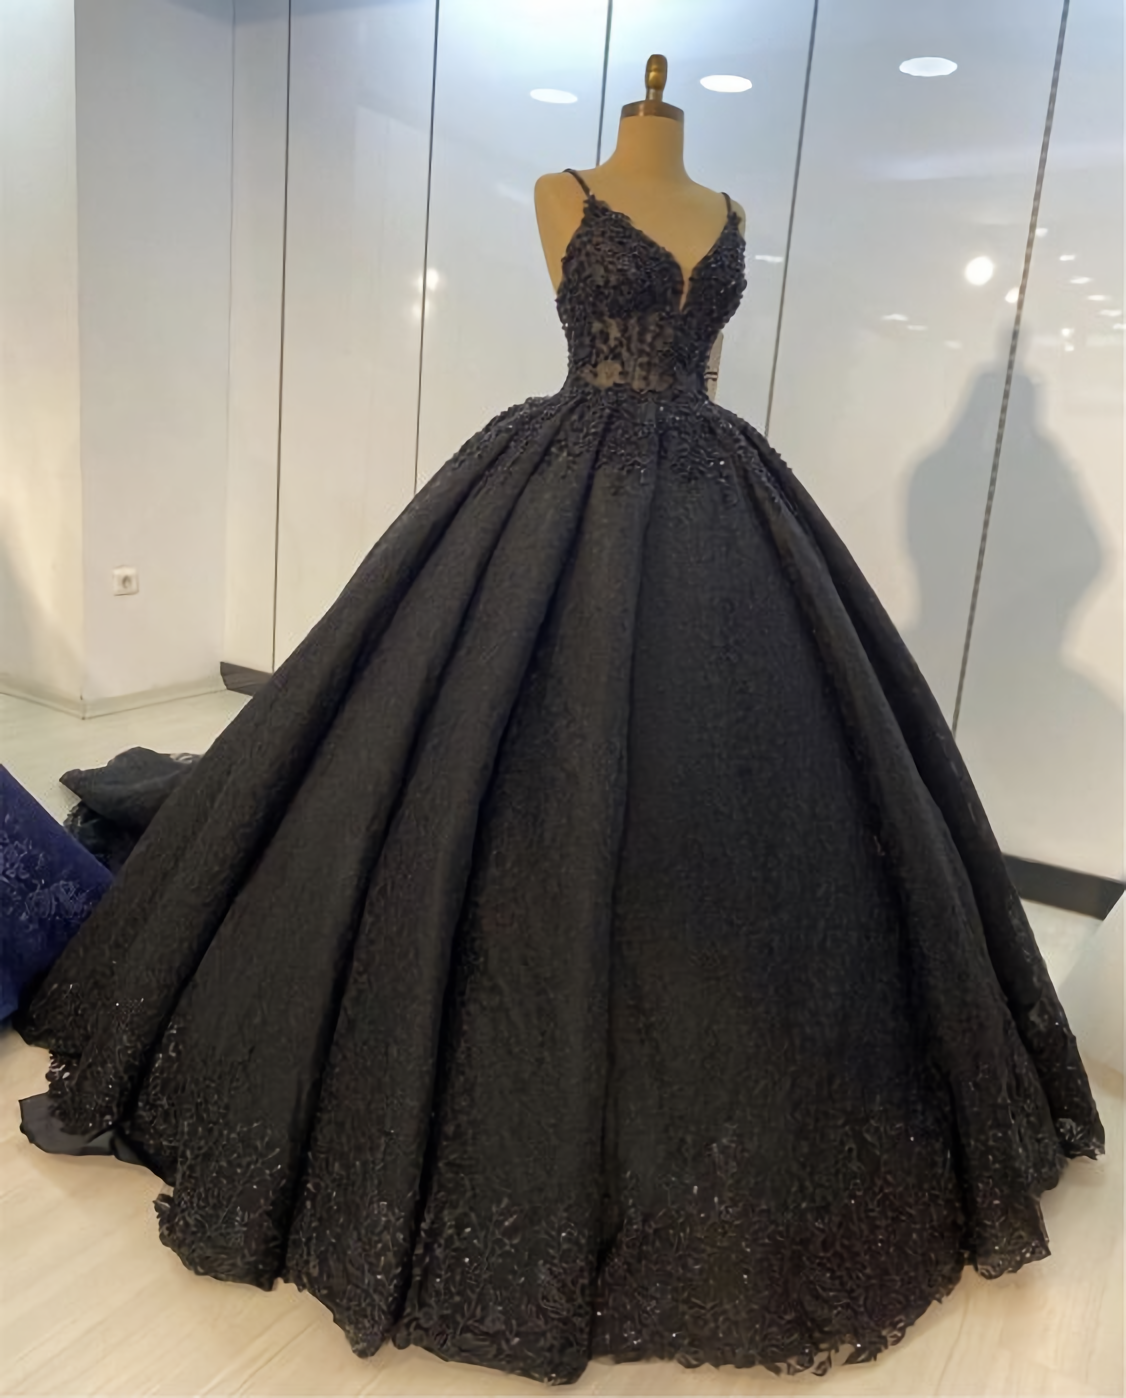 Black Lace Corset Ball Gown Dresses For Corset Wedding Corset Prom Evening Gown outfits, Wedding Dresses Prices